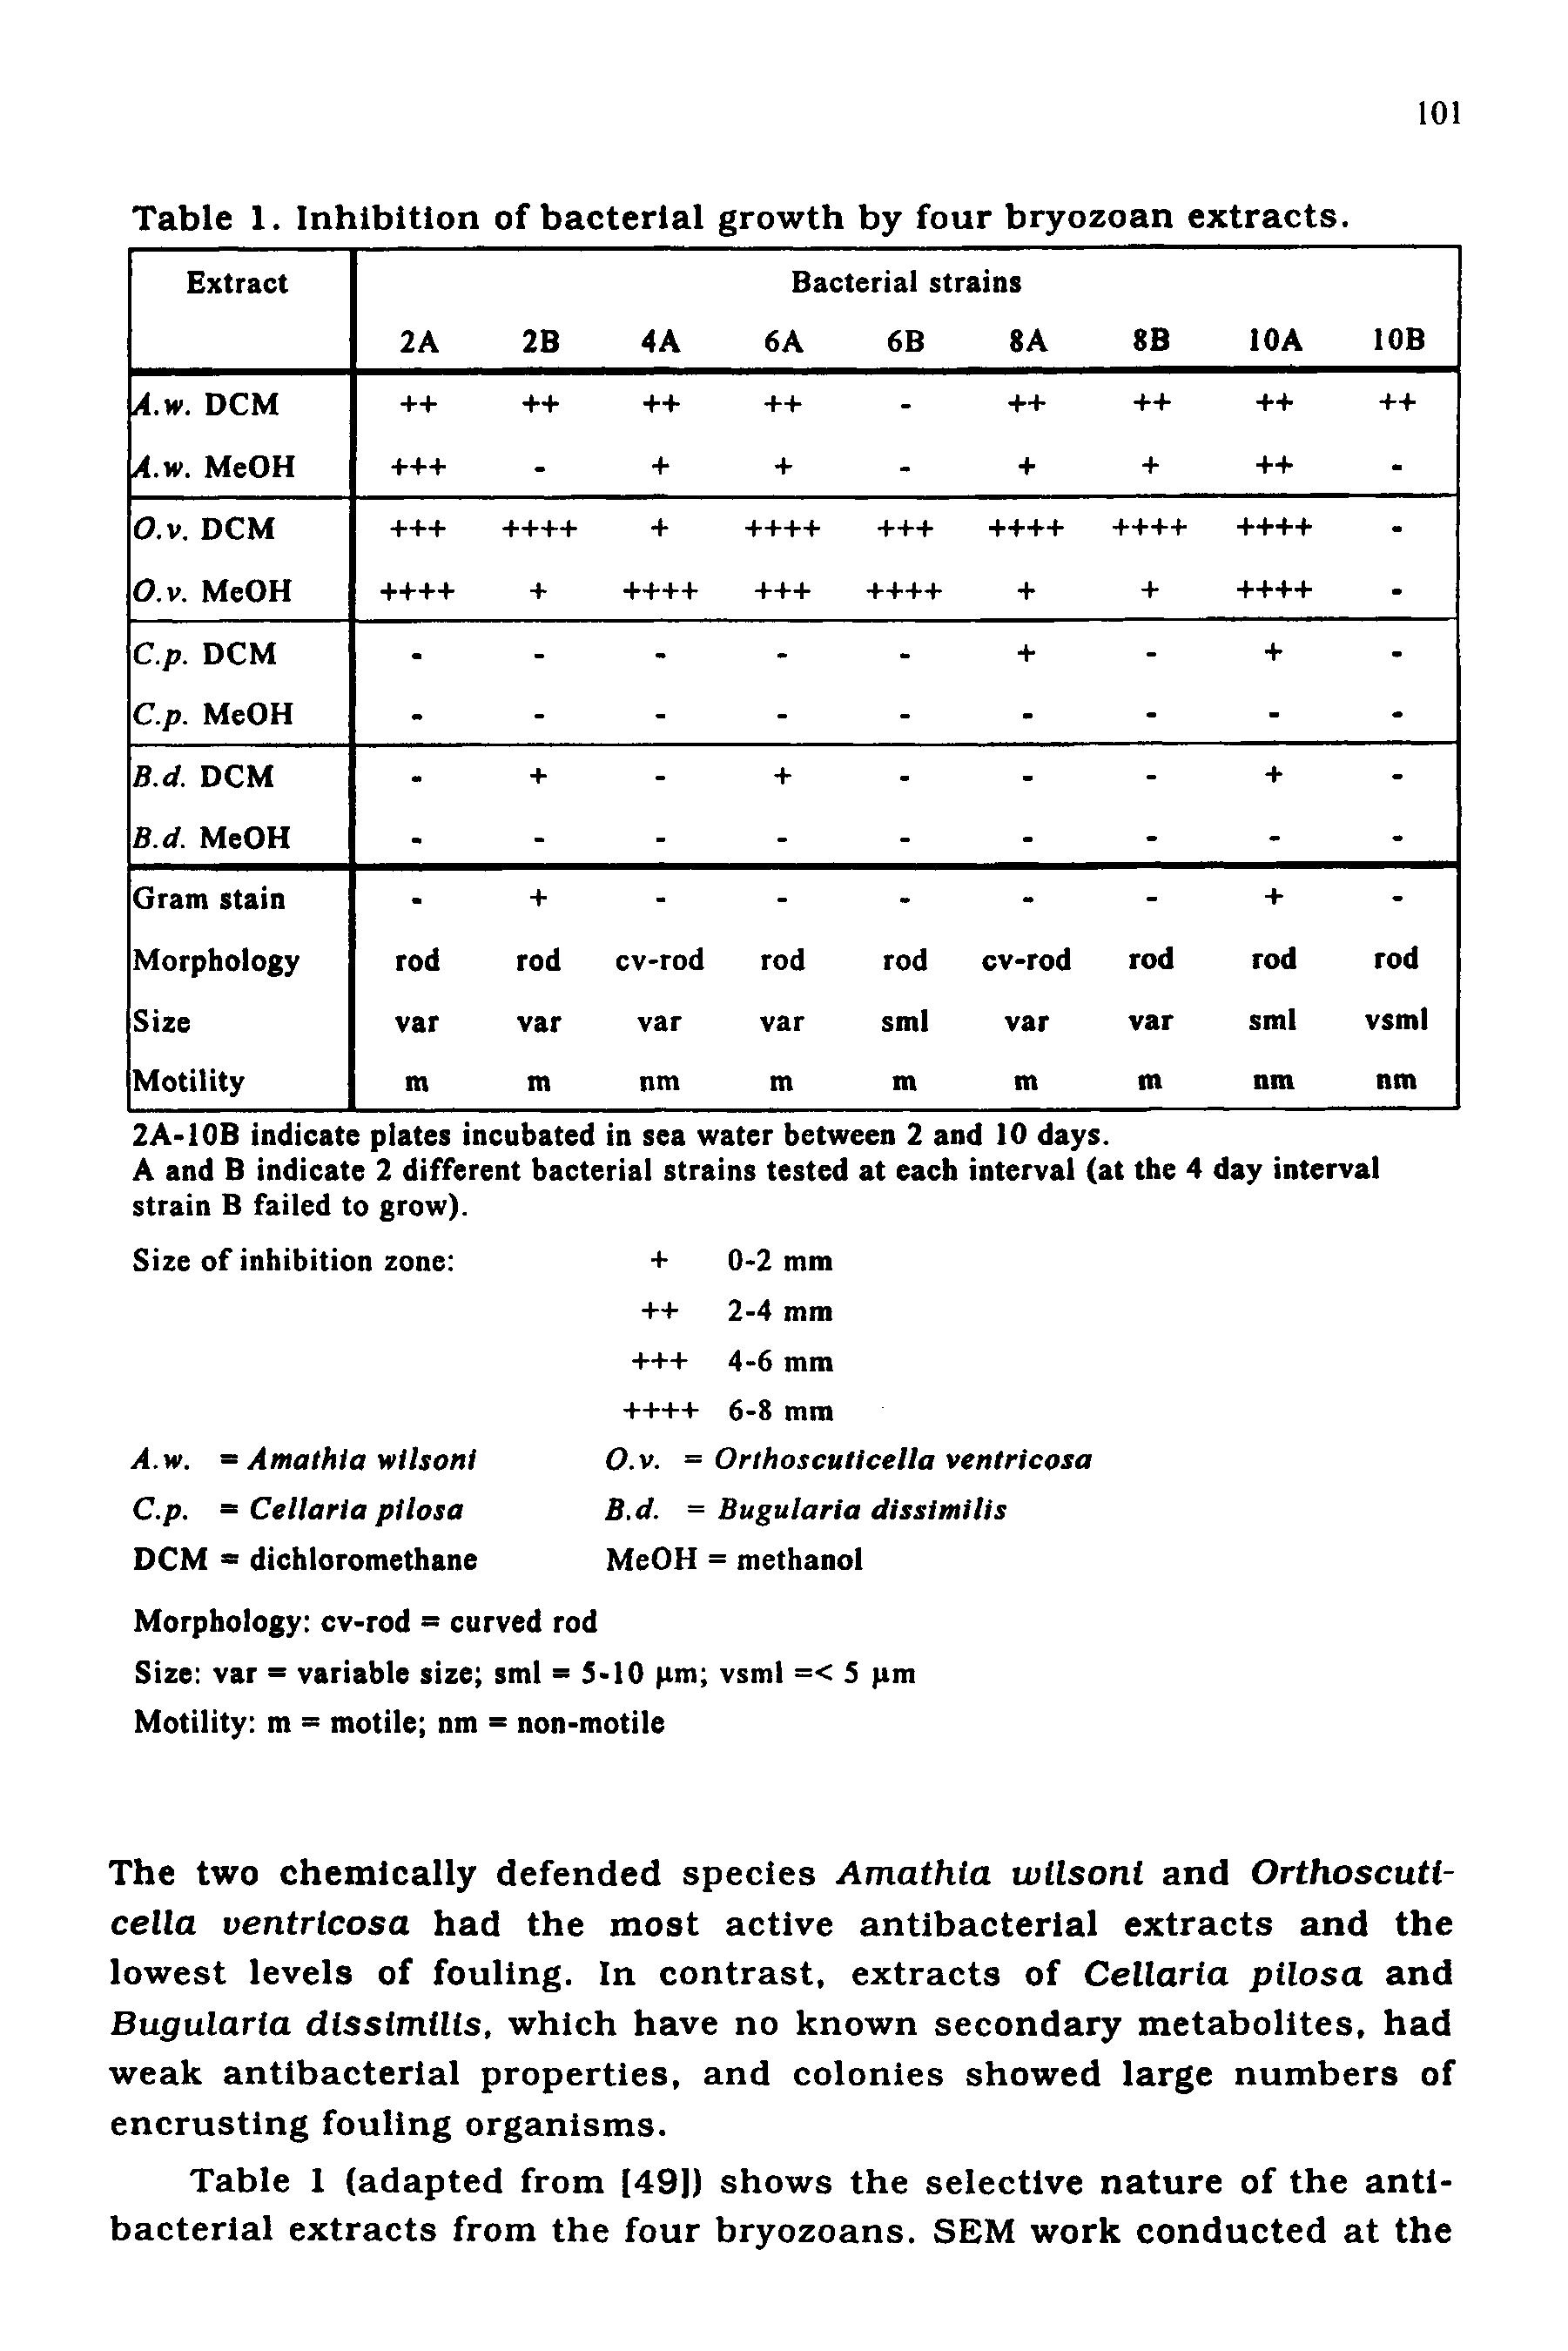 Table 1. Inhibition of bacterial growth by four bryozoan extracts.